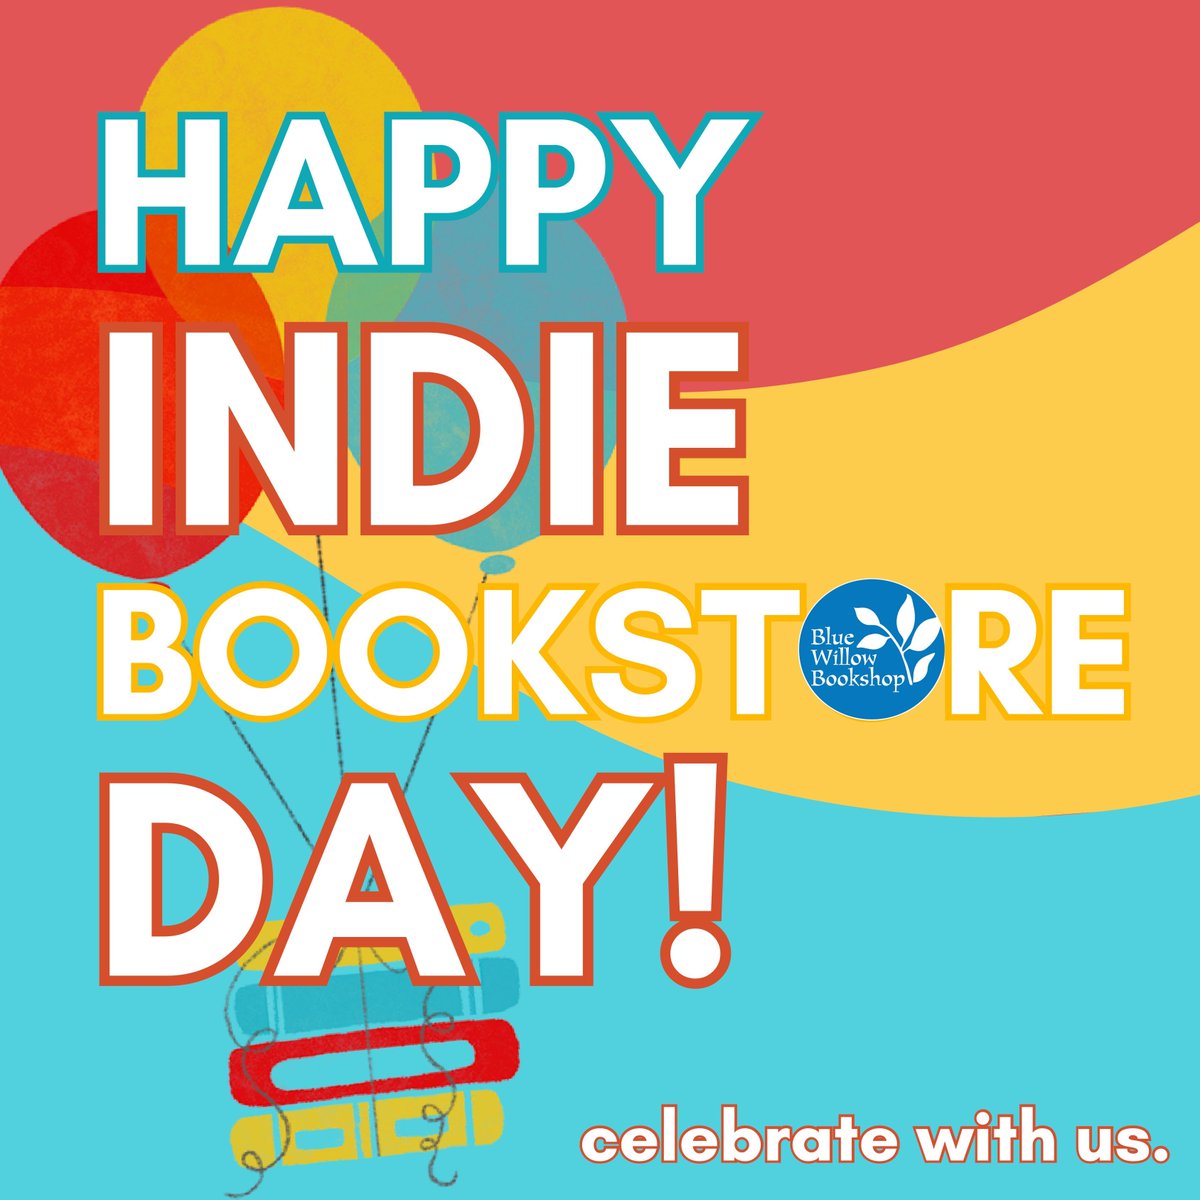 HAPPY INDIE BOOKSTORE DAY! 😍

We're excited to see you for one of our favorite bookish holidays of the year!

🫶Come meet fellow book lovers
📚Browse Blind Dates with a Book
🎉Shop IBD merch
👀Search for @librofm's Golden Ticket worth 12 free audiobooks

bluewillowbookshop.com/IndieBookstore…